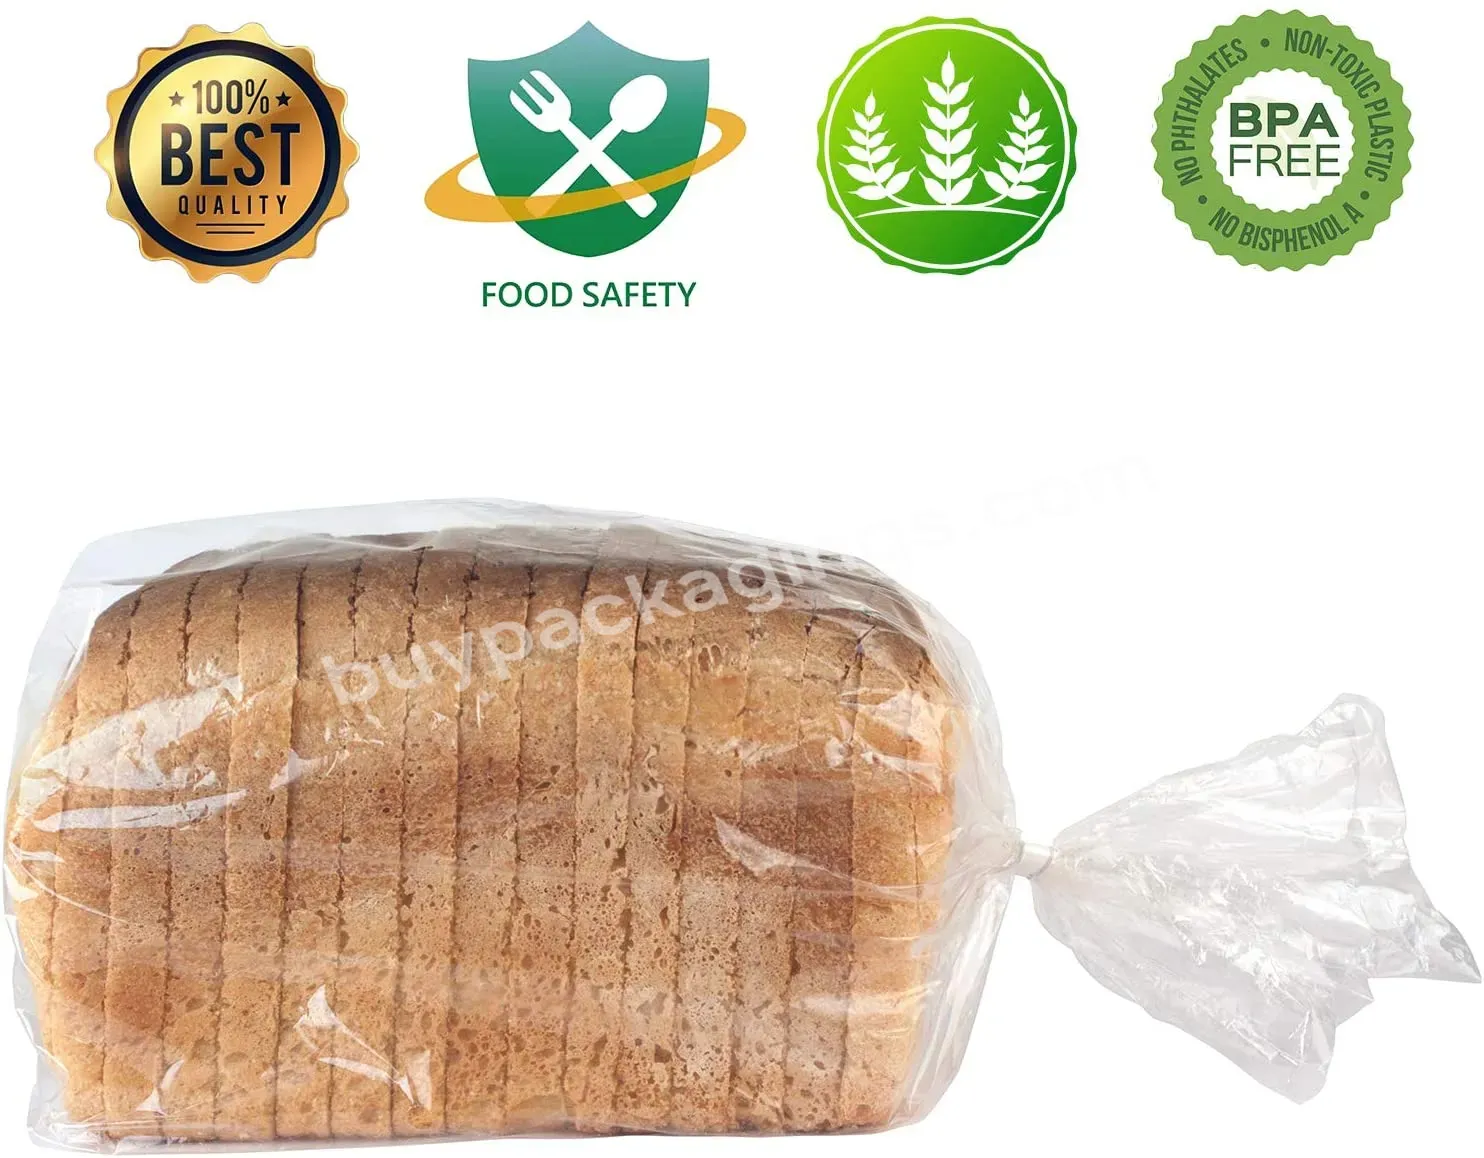 100pieces 18x4x8 Inches Reusable Bread Bags Bread Loaf Packaging Bag With Ties - Buy Reusable Bread Bags,Bread Loaf Packaging Bag,Bread Bags With Ties.